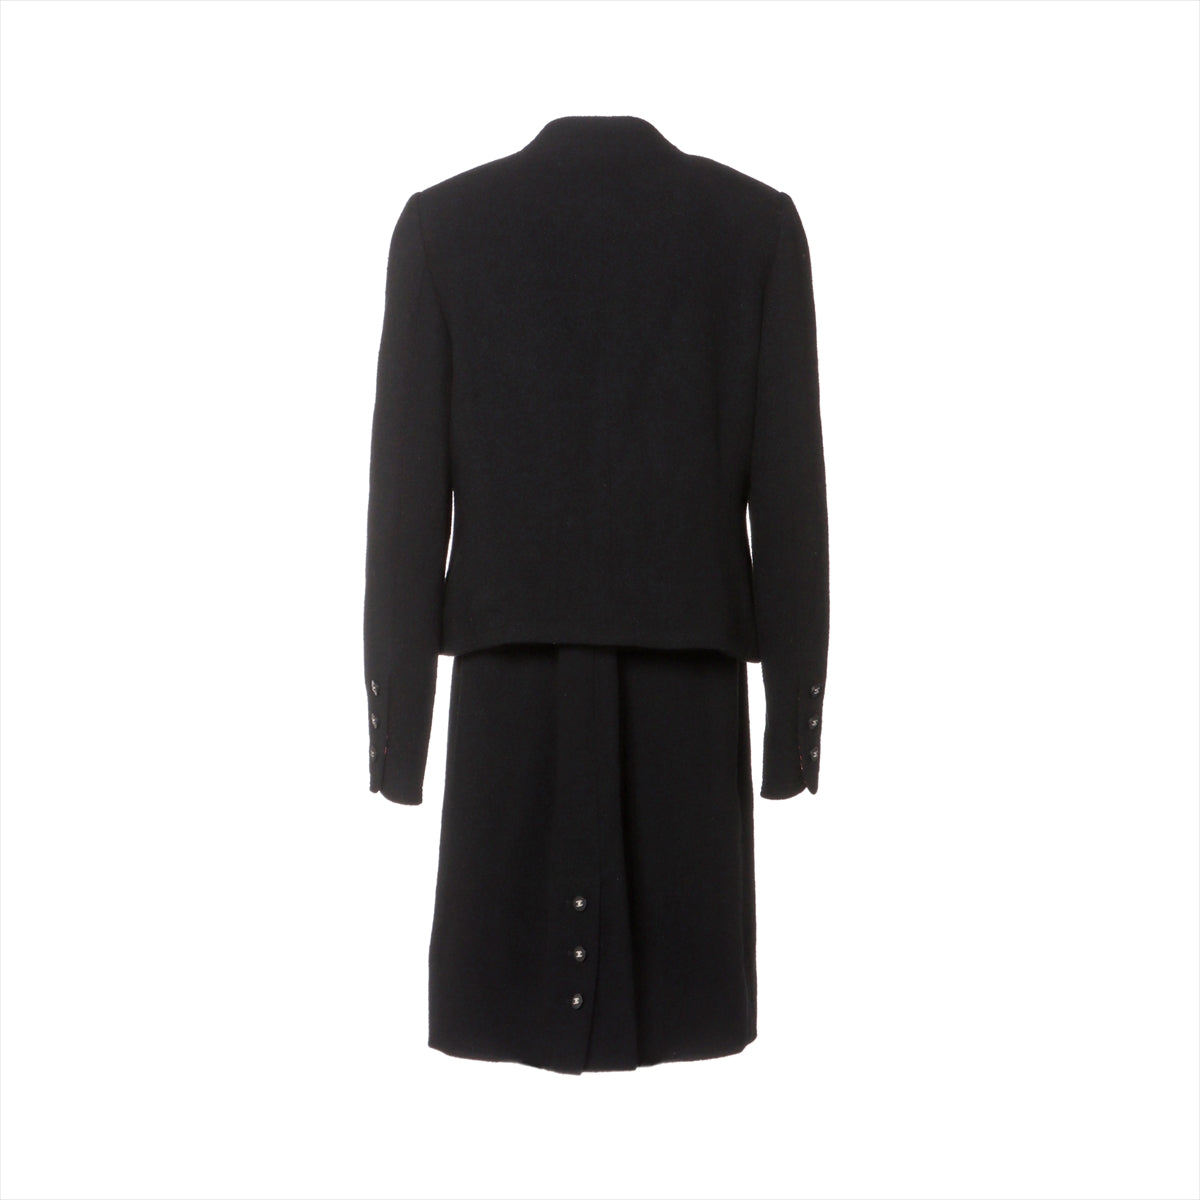 Chanel Coco Button 96P Wool Setup 44 Ladies' Black  P07026W02302 There is a scuff